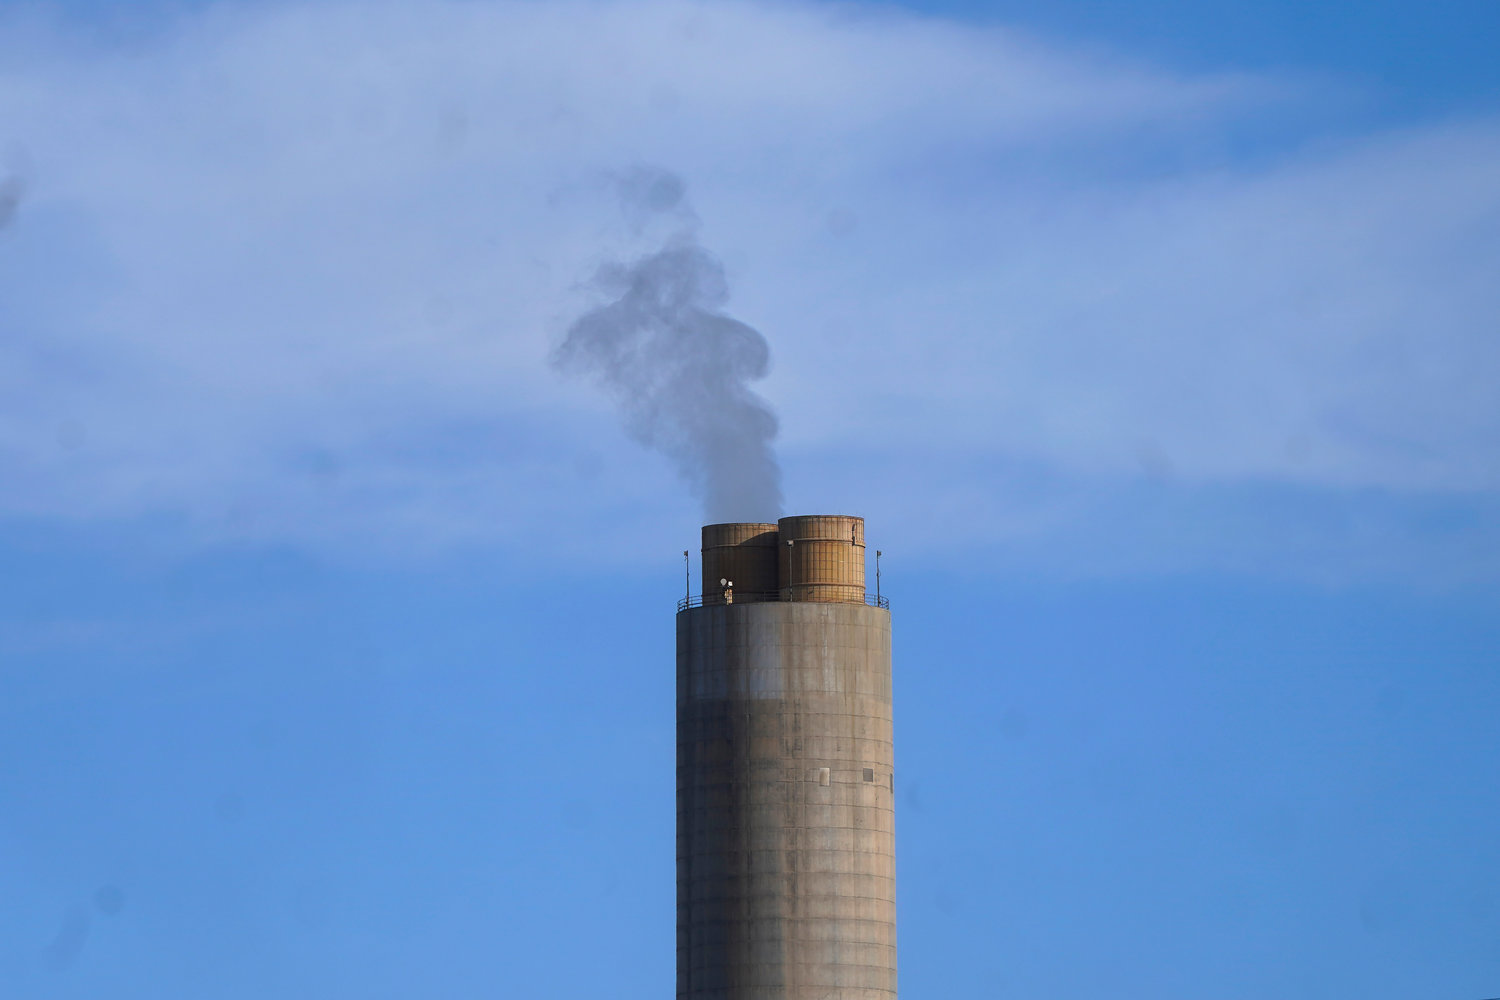 A smokestack stands at a coal plant on Wednesday, June 22, 2022, in Delta, Utah. On Monday, Sept. 19, the world’s first public database of fossil fuel production, reserves and emissions launches.  It shows that the United States and Russia have enough fossil fuel reserves to exhaust the world’s remaining carbon budget to stay under 1.5 degrees Celsius warming.